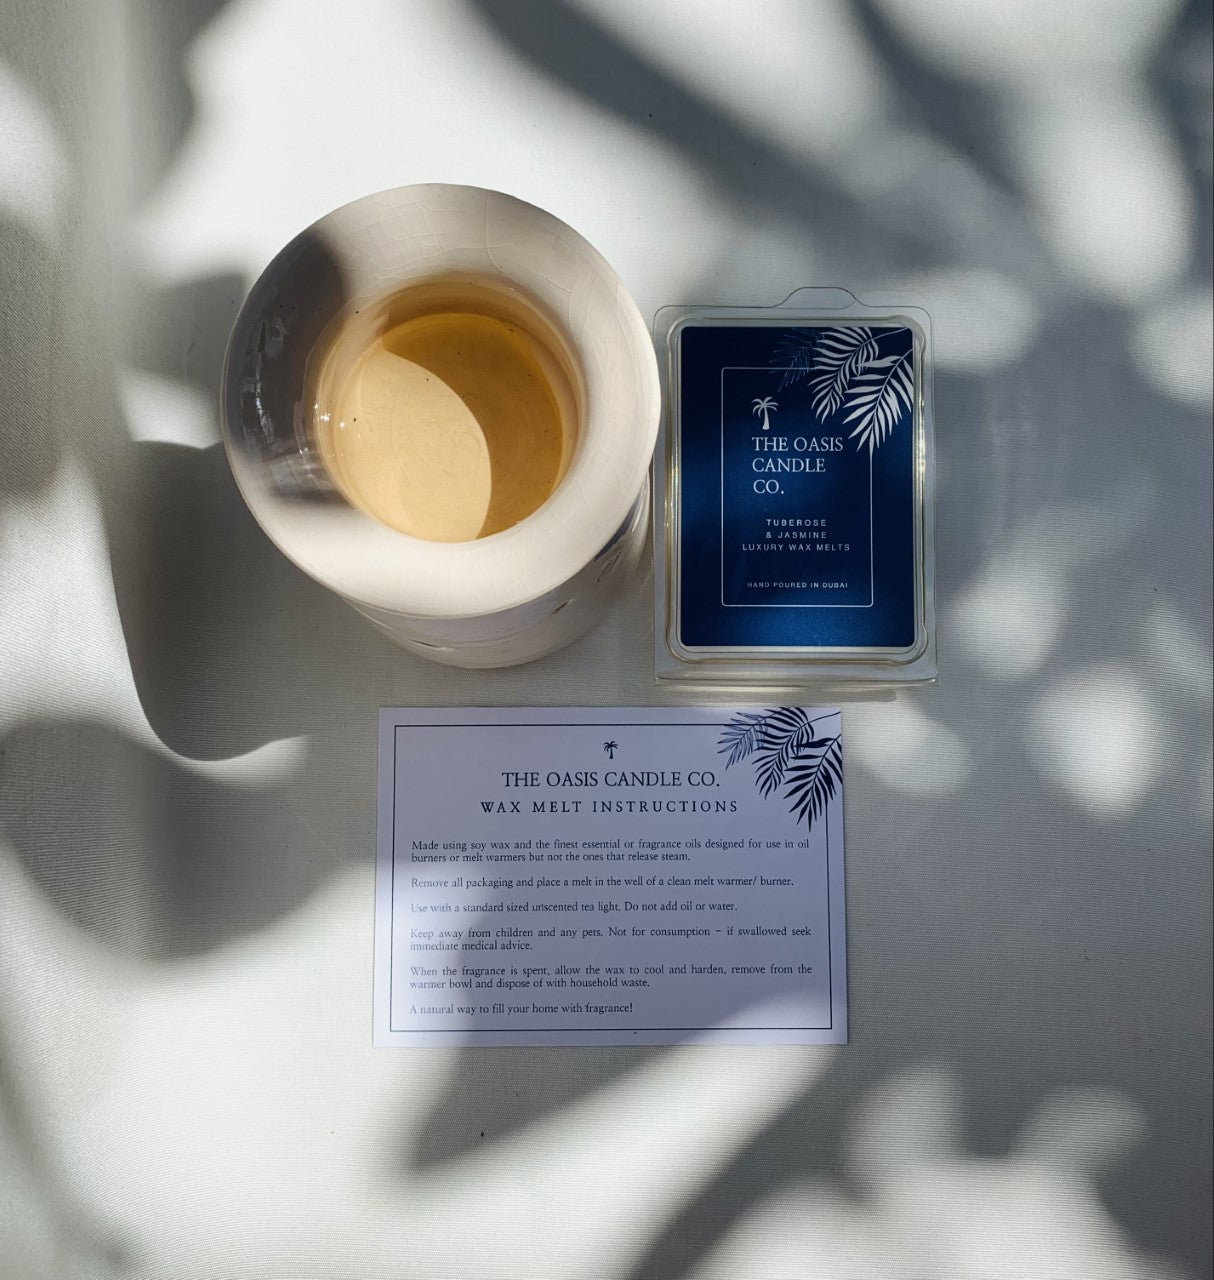 Luxury wax melts from The Oasis Candle Co